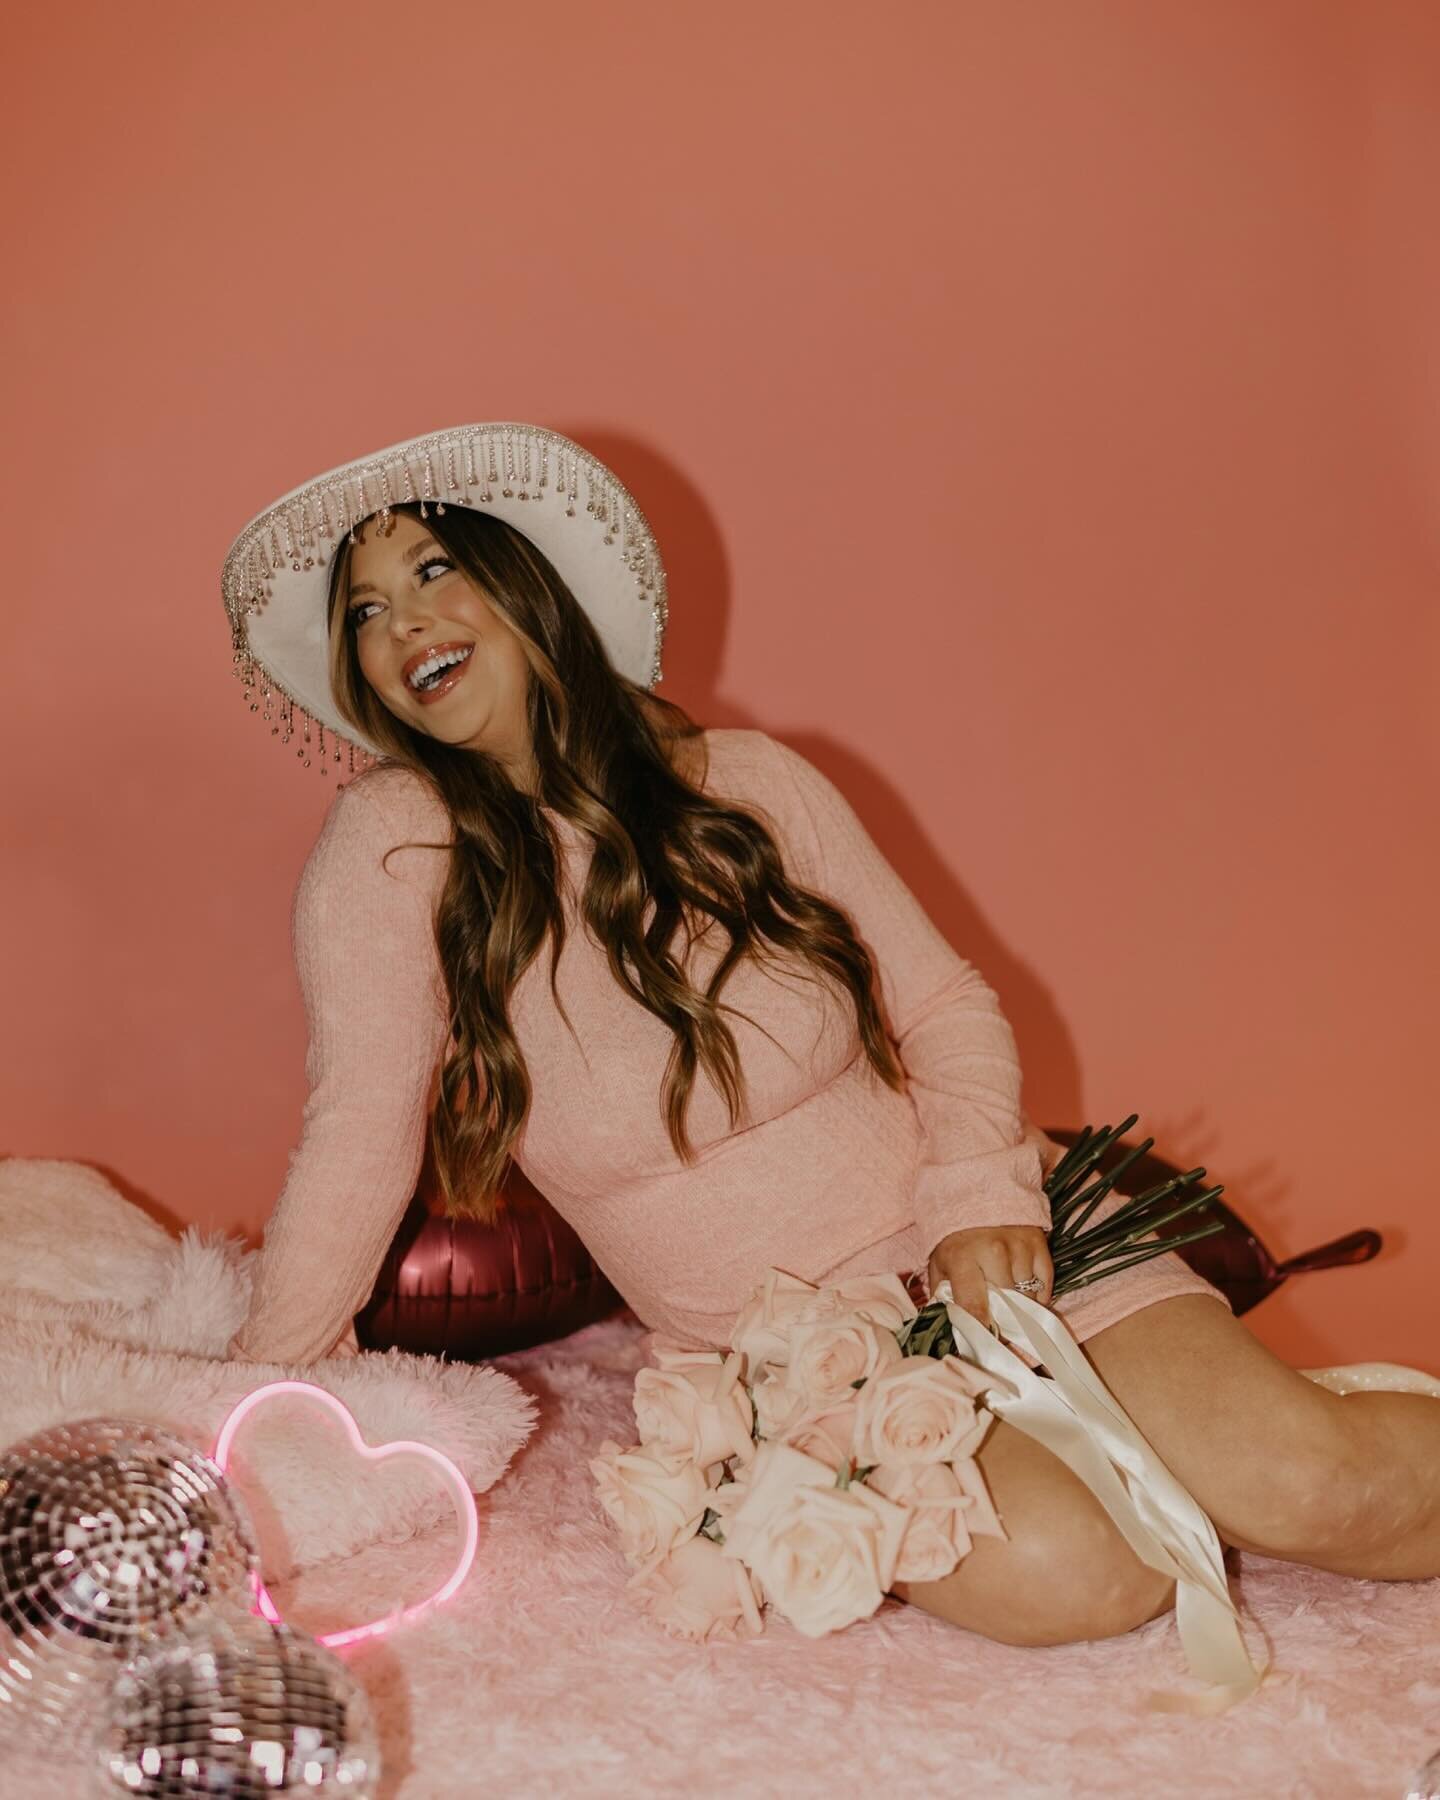 Channeling her inner disco cowgirl while also being the most stunning mama to be 🩷

Valentines Day Content Day : 
Host: @dreamily.portraits 
Co-Host &amp; Earrings: @__wild.flowers__
Hair: @ravensbeautybook
Makeup: @emilyoplandink
Event Decor: @bohe